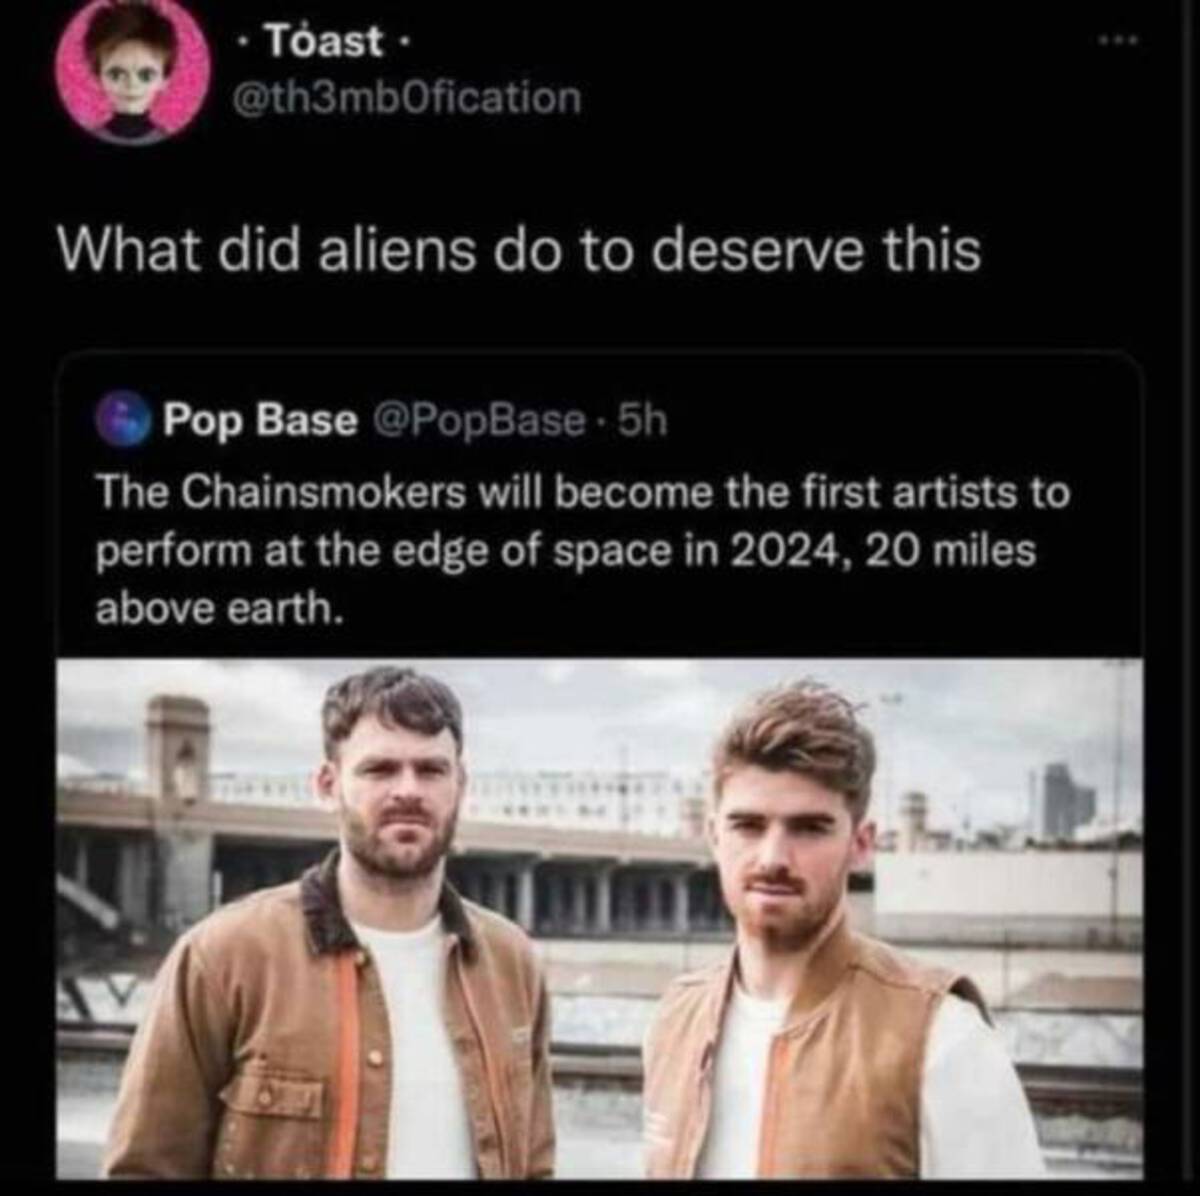 th3 chainsmokers - .Toast. What did aliens do to deserve this Pop Base The Chainsmokers will become the first artists to perform at the edge of space in 2024, 20 miles above earth. 8